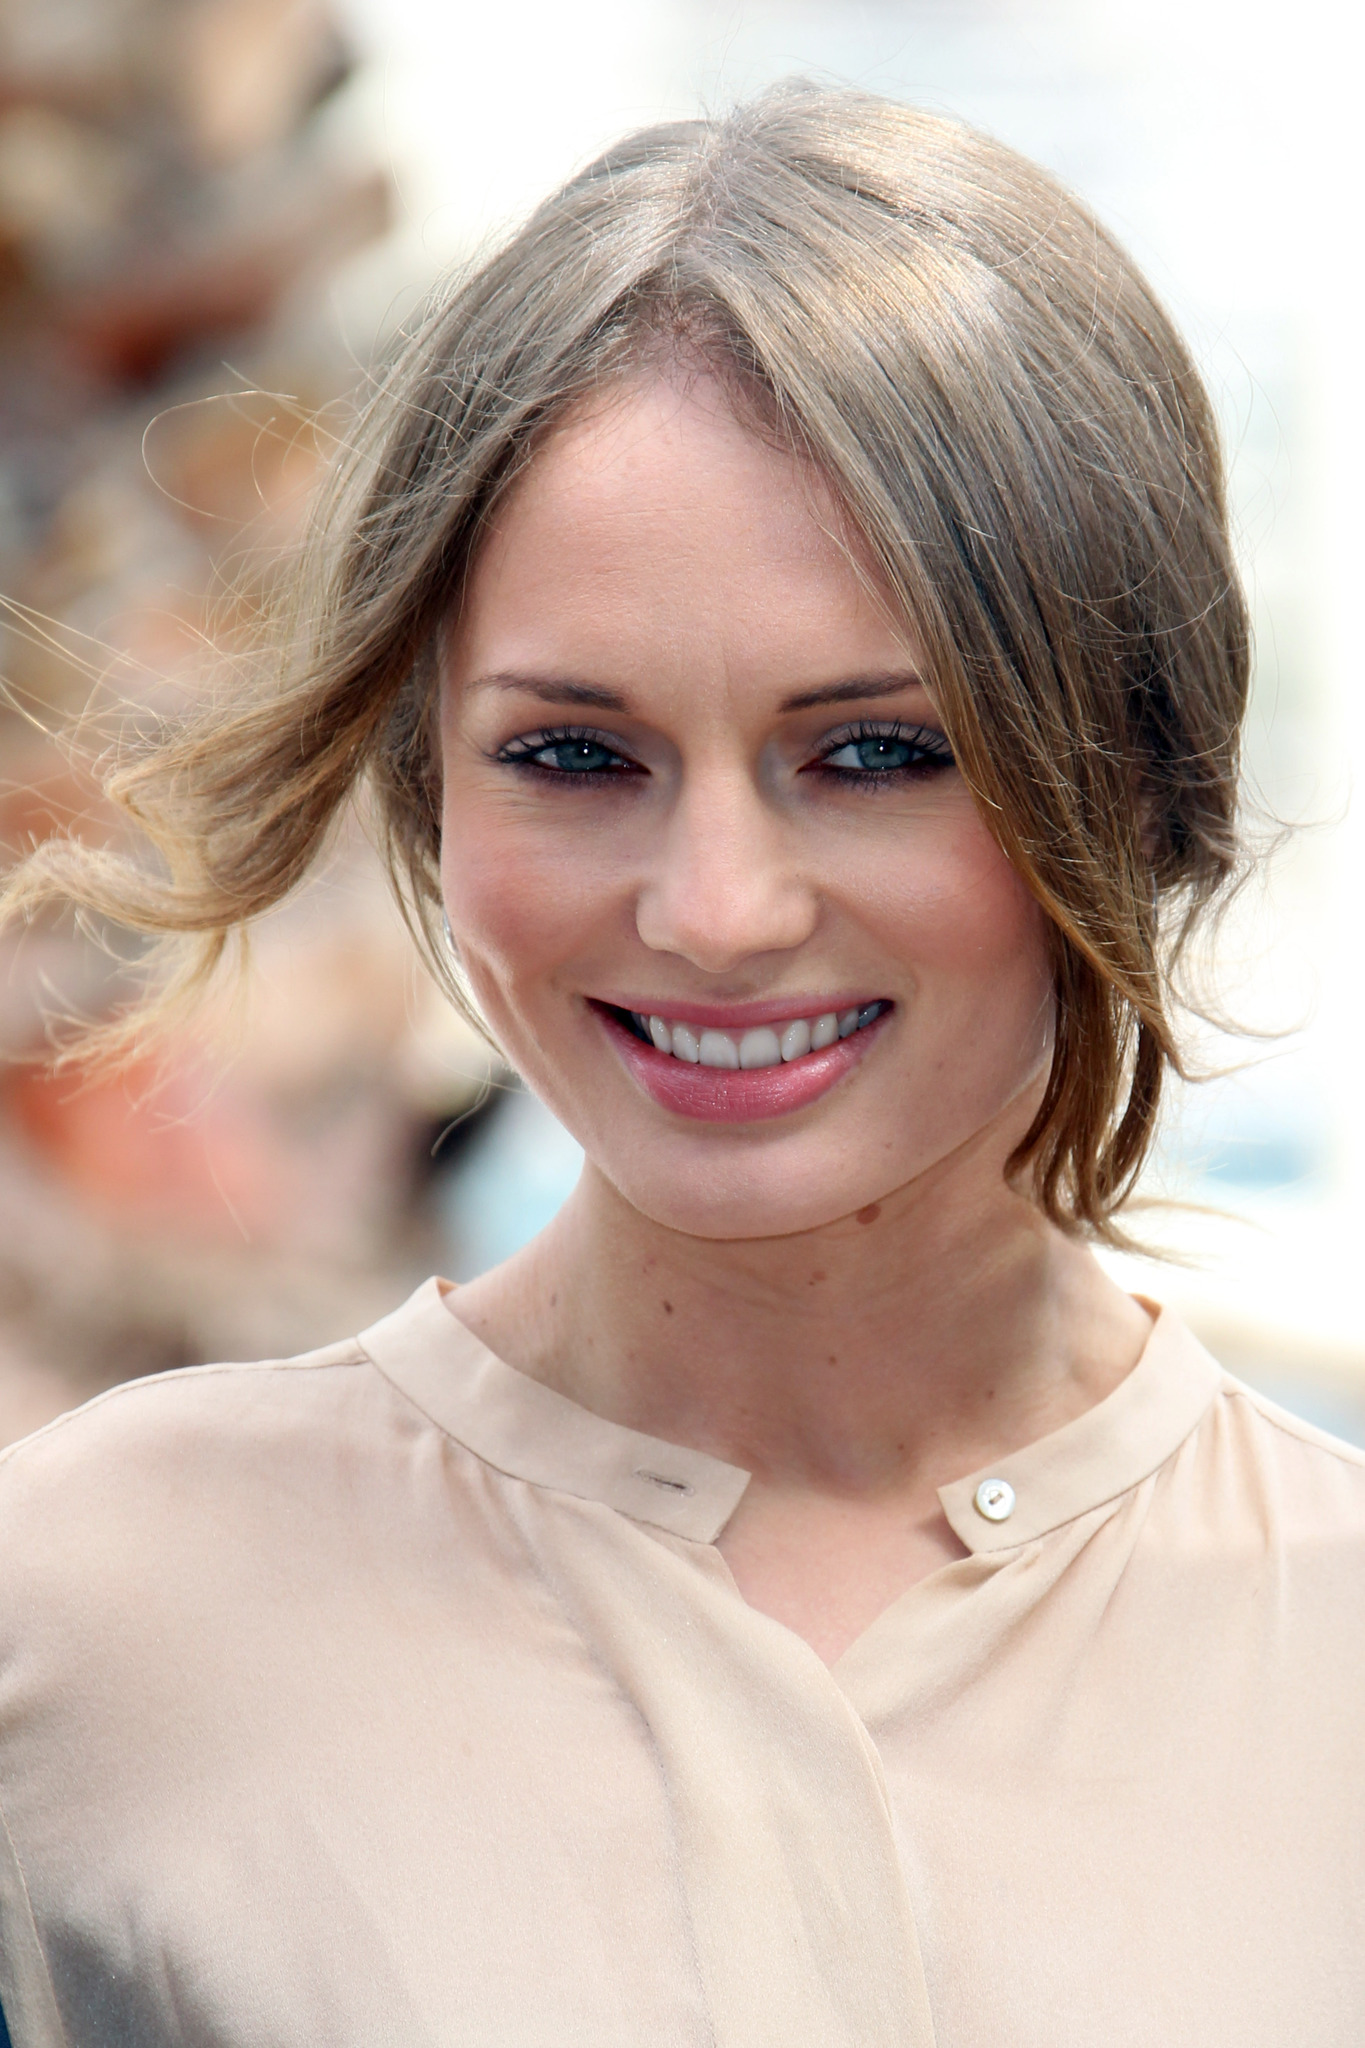 British actress Laura Haddock attends a photocall for the TV serie 'Da Vinci's Demons' at MIP TV 2013 on April 8, 2013 in Cannes, France.